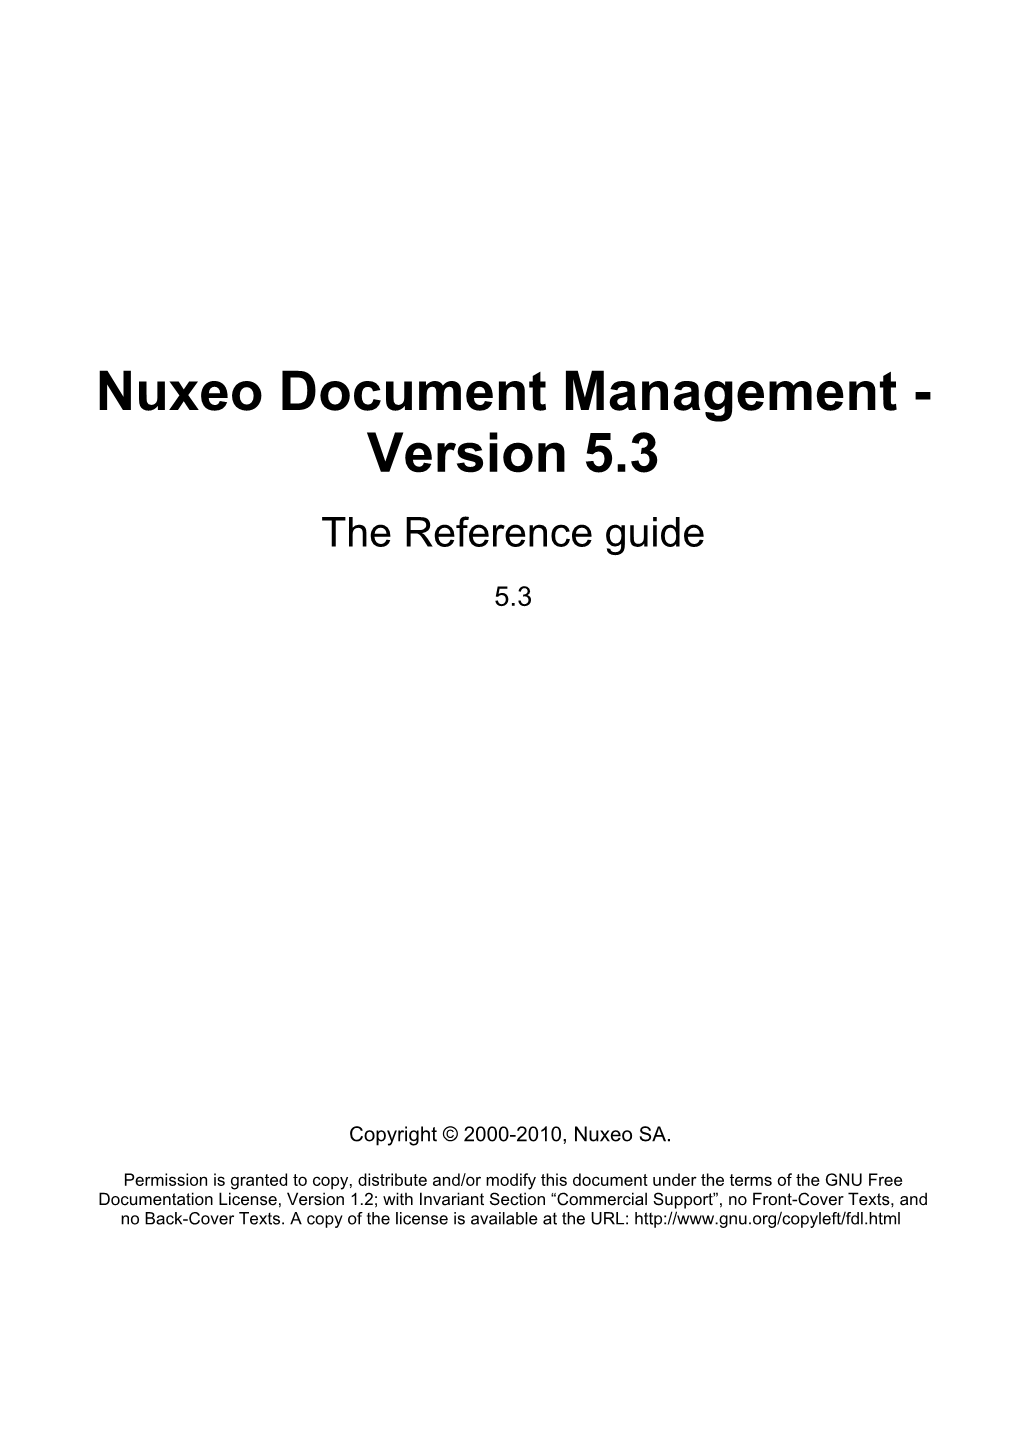 Nuxeo Document Management - Version 5.3 the Reference Guide